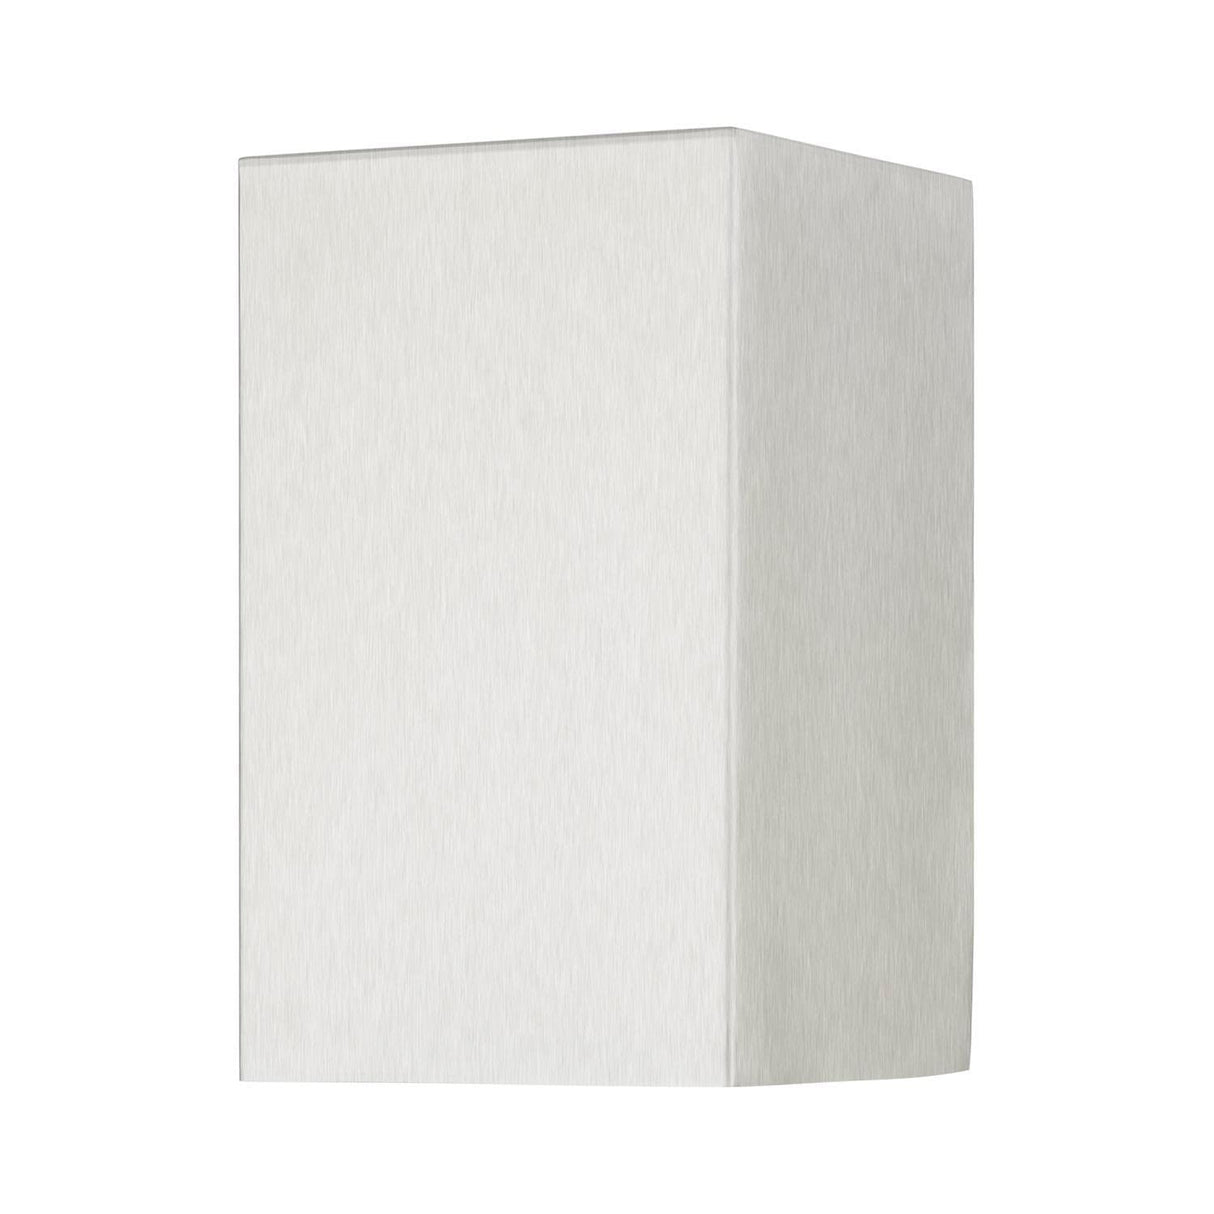 Livex Lighting 24671-91 Derby - 1 Light Small Outdoor ADA Wall Sconce in Urban Style-7 Inches Tall and 4.25 Inches Wide, Finish Color: Brushed Nickel